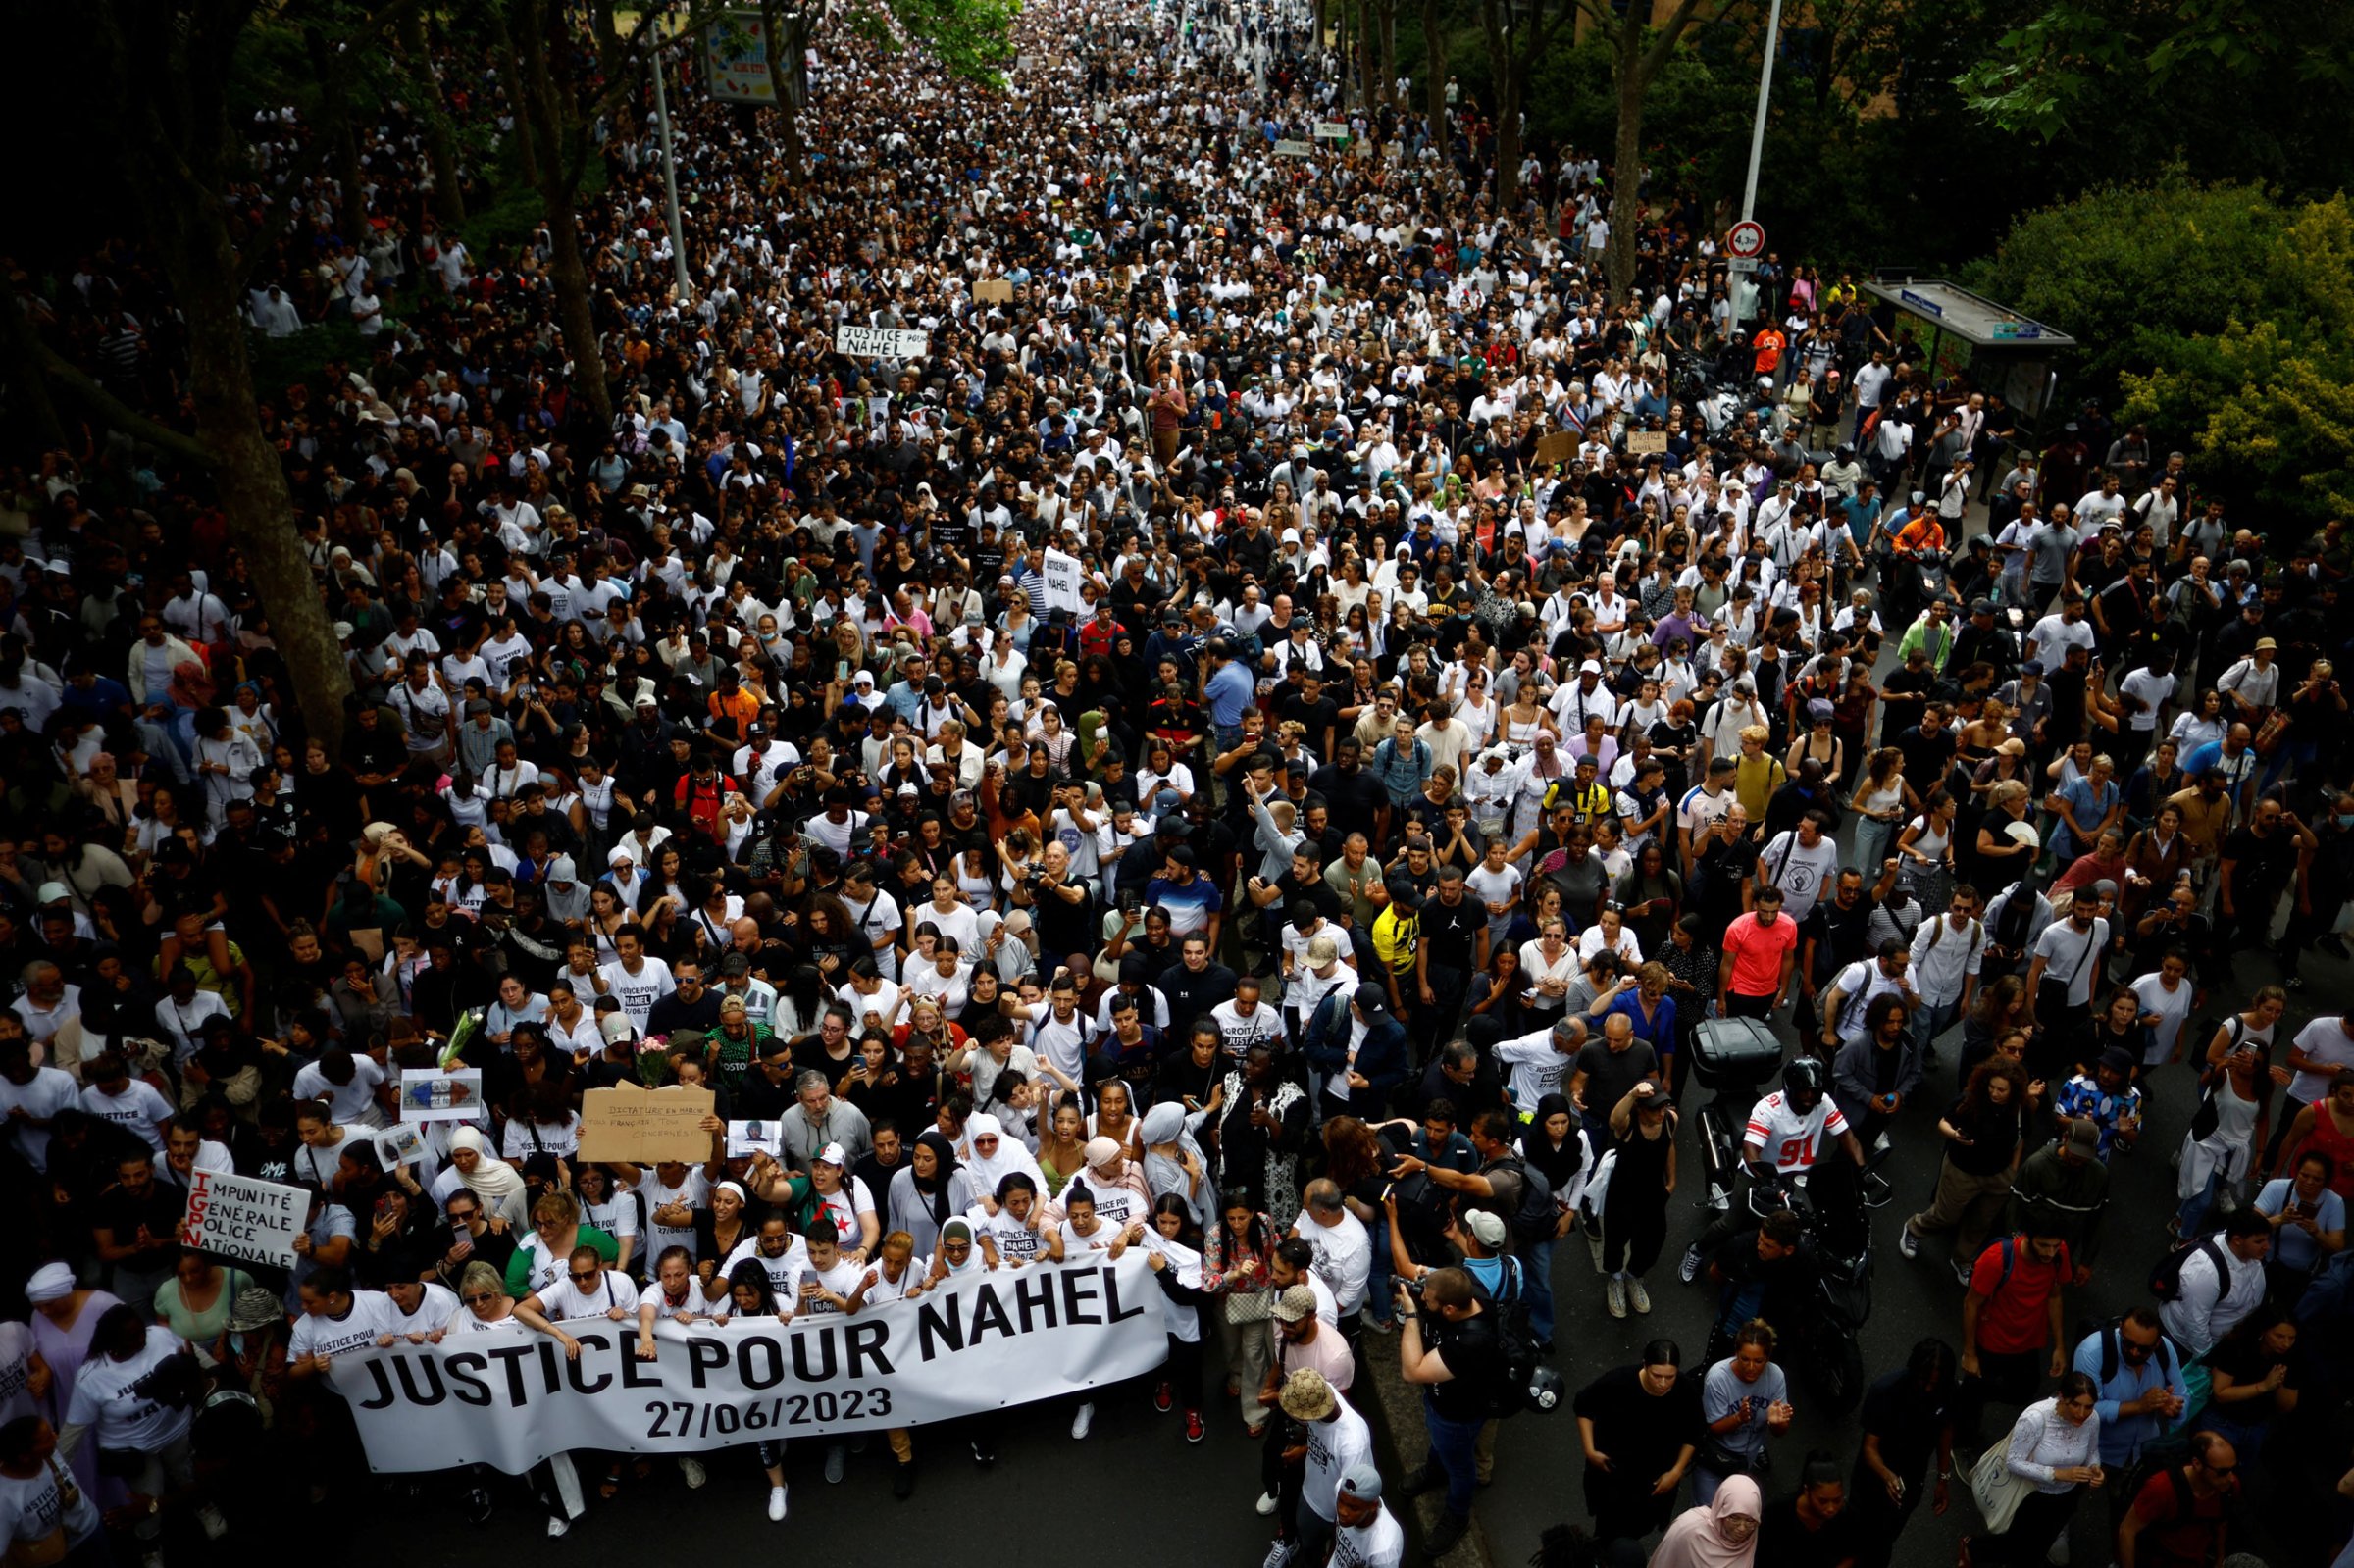 People attend a march in tribute to Nahel, a 17-year-old teenager killed by a French police officer during a traffic stop, in Nanterre, Paris, on June 29, 2023. The sign’s slogan reads “Justice for Nahel.”